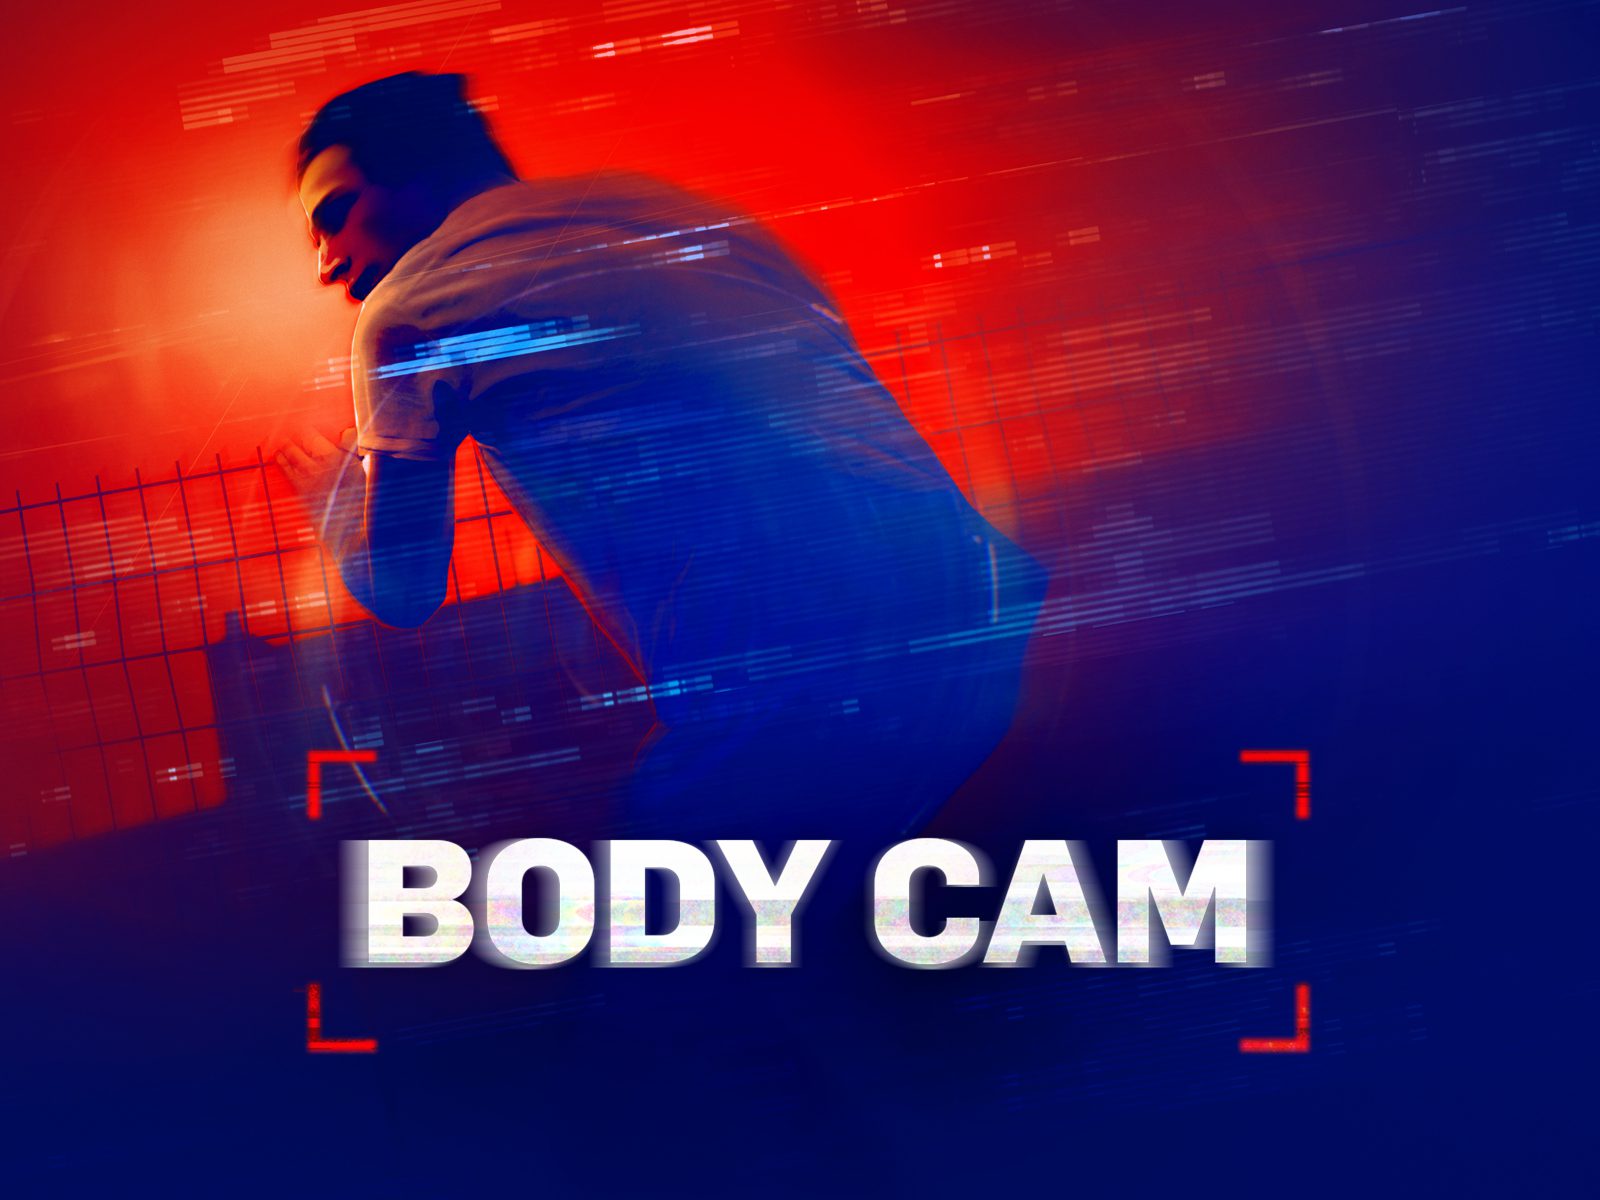 A promotional image for Arrow Media's hit TV series Body Cam, powered by Limecraft.